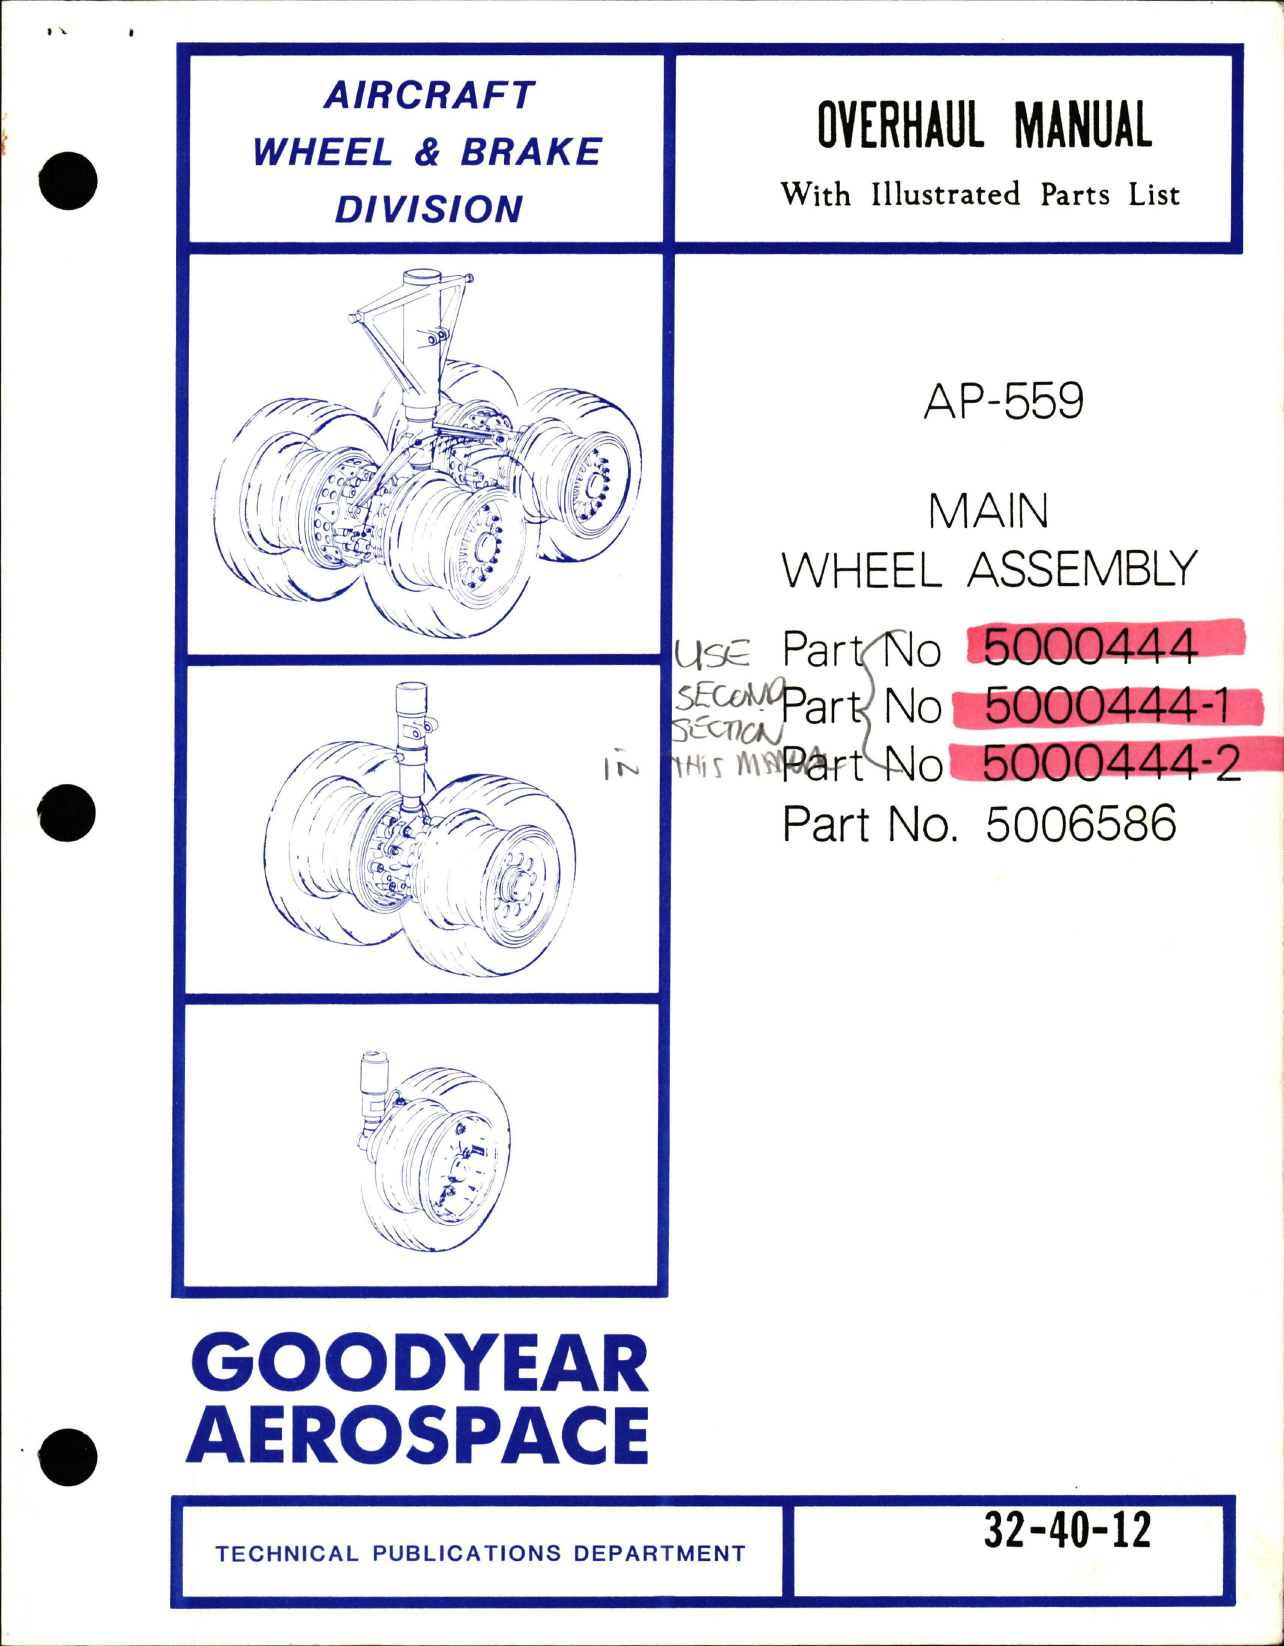 Sample page 1 from AirCorps Library document: Overhaul Manual with Illustrated Parts List for Main Wheel Assembly